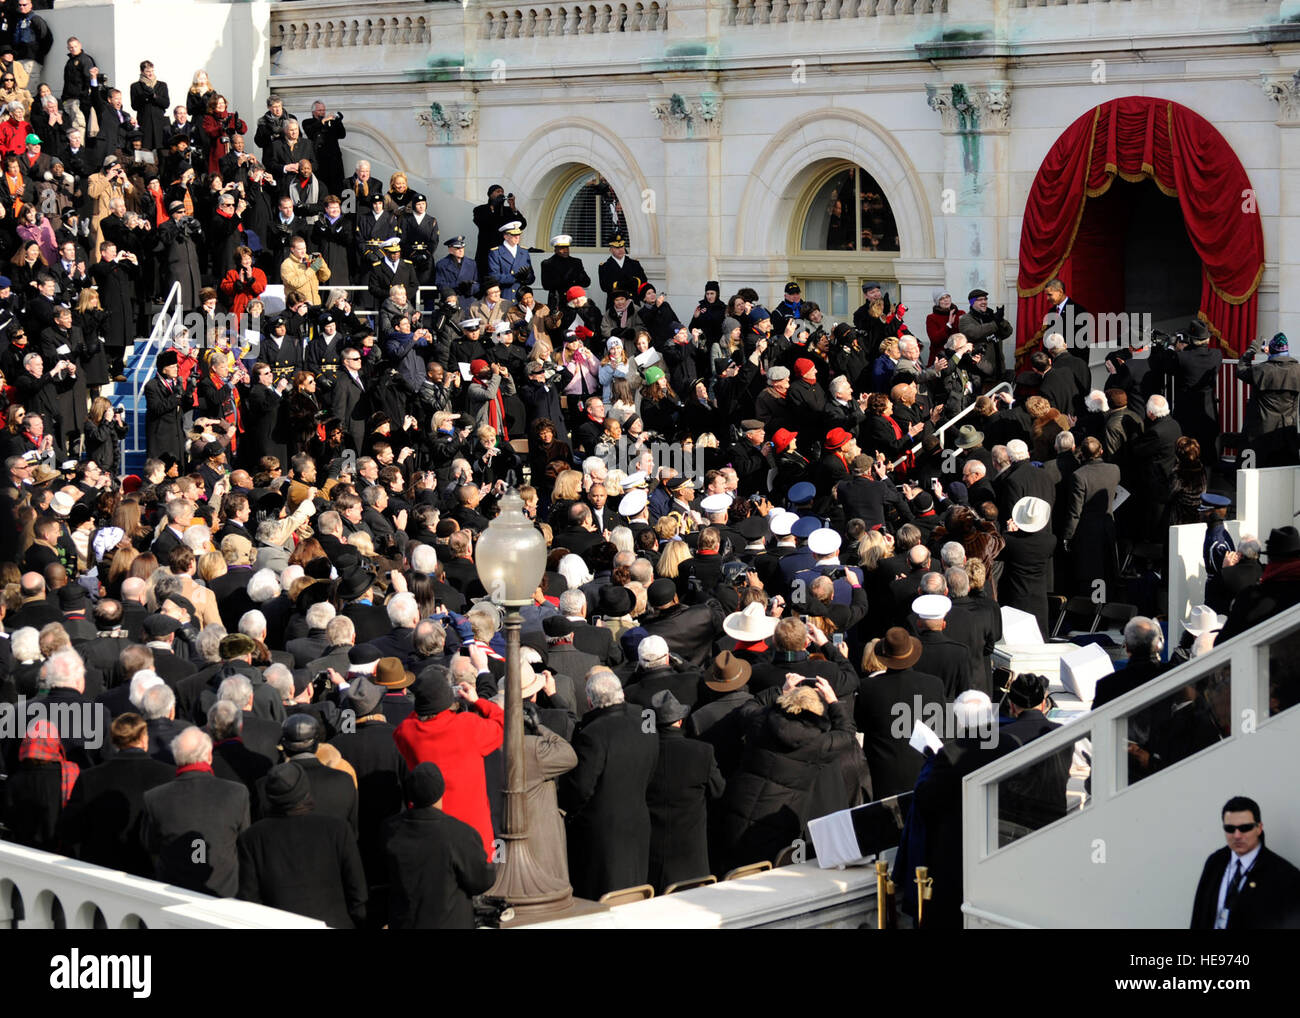 President-elect Barack Obama arrives on the U.S. Capitol steps prior to taking the oath of office in Washington, D.C., Jan. 20, 2009.  More than 5,000 men and women in uniform are providing military ceremonial support to the presidential inauguration, a tradition dating back to George Washington's 1789 inauguration.   Master Sgt. Cecilio Ricardo, U.S. Air Force Stock Photo